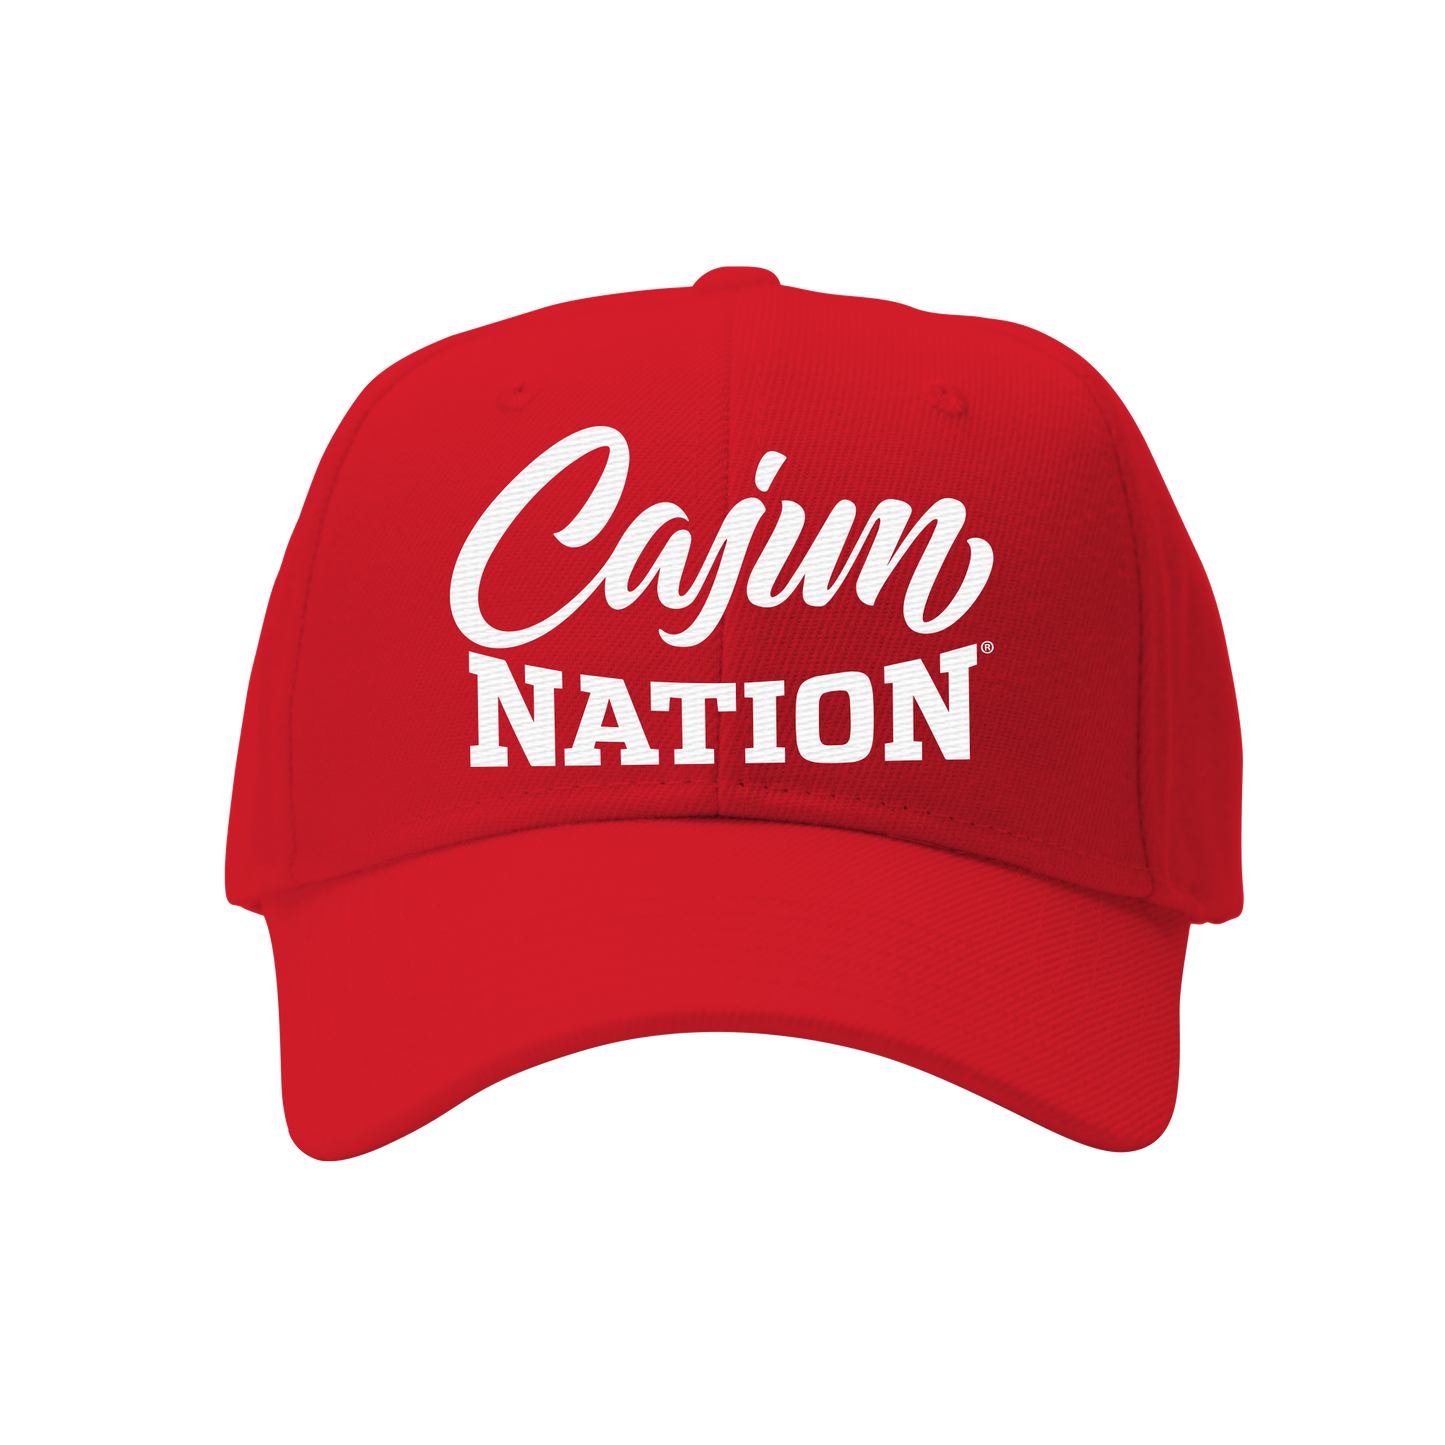  Cajun Nation Red Classic Polo Cap  Pre-curved Visor Fabric strap with antique brass slide buckle closure 100% Cotton One size fits Most Plastisol print